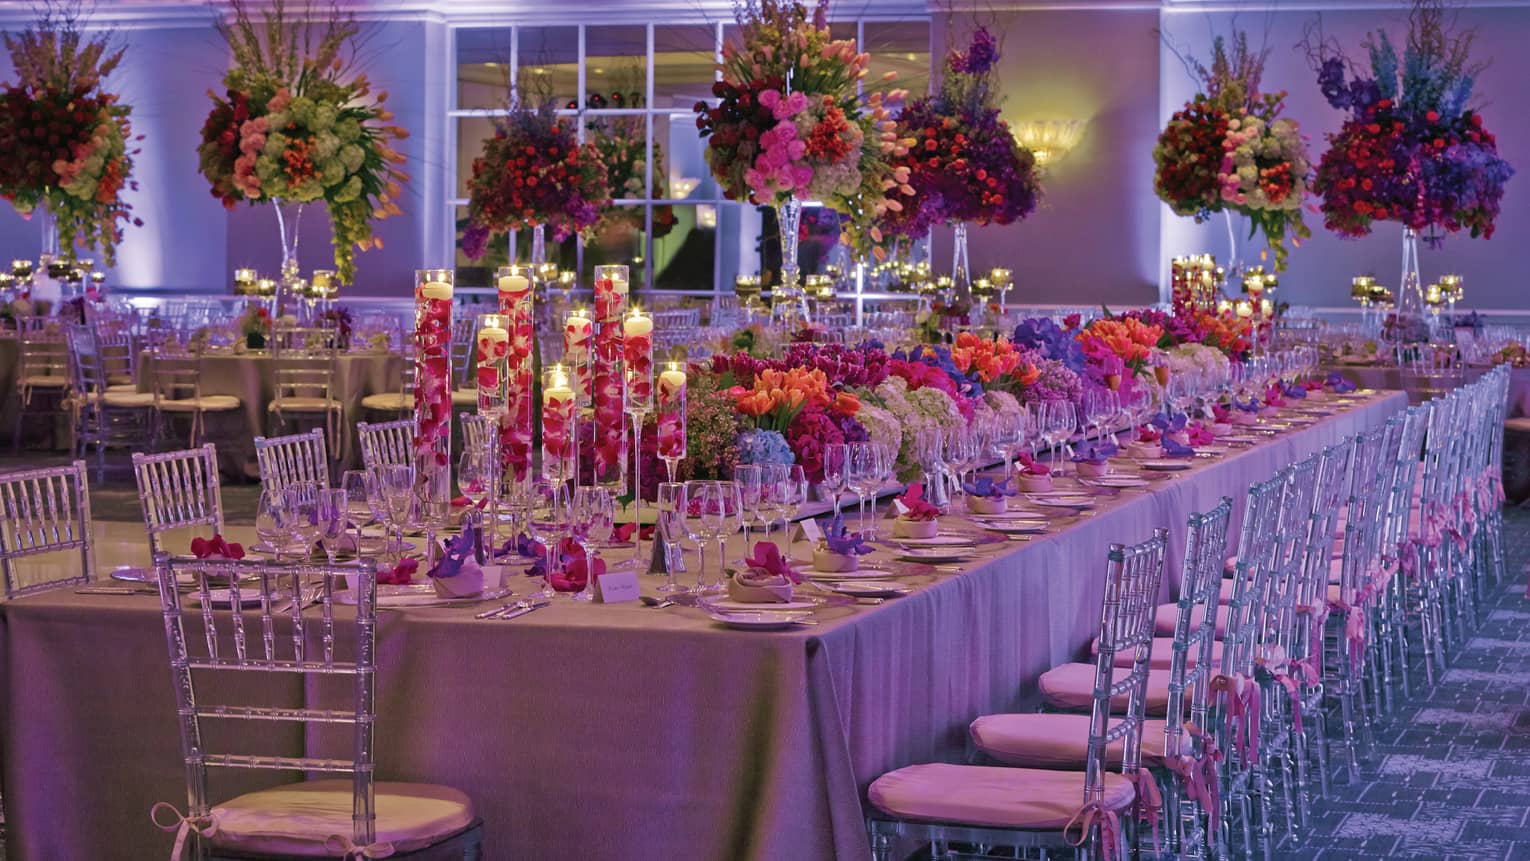 Large tropical flower-filled wedding banquet table in candlelit ballroom with purple lights